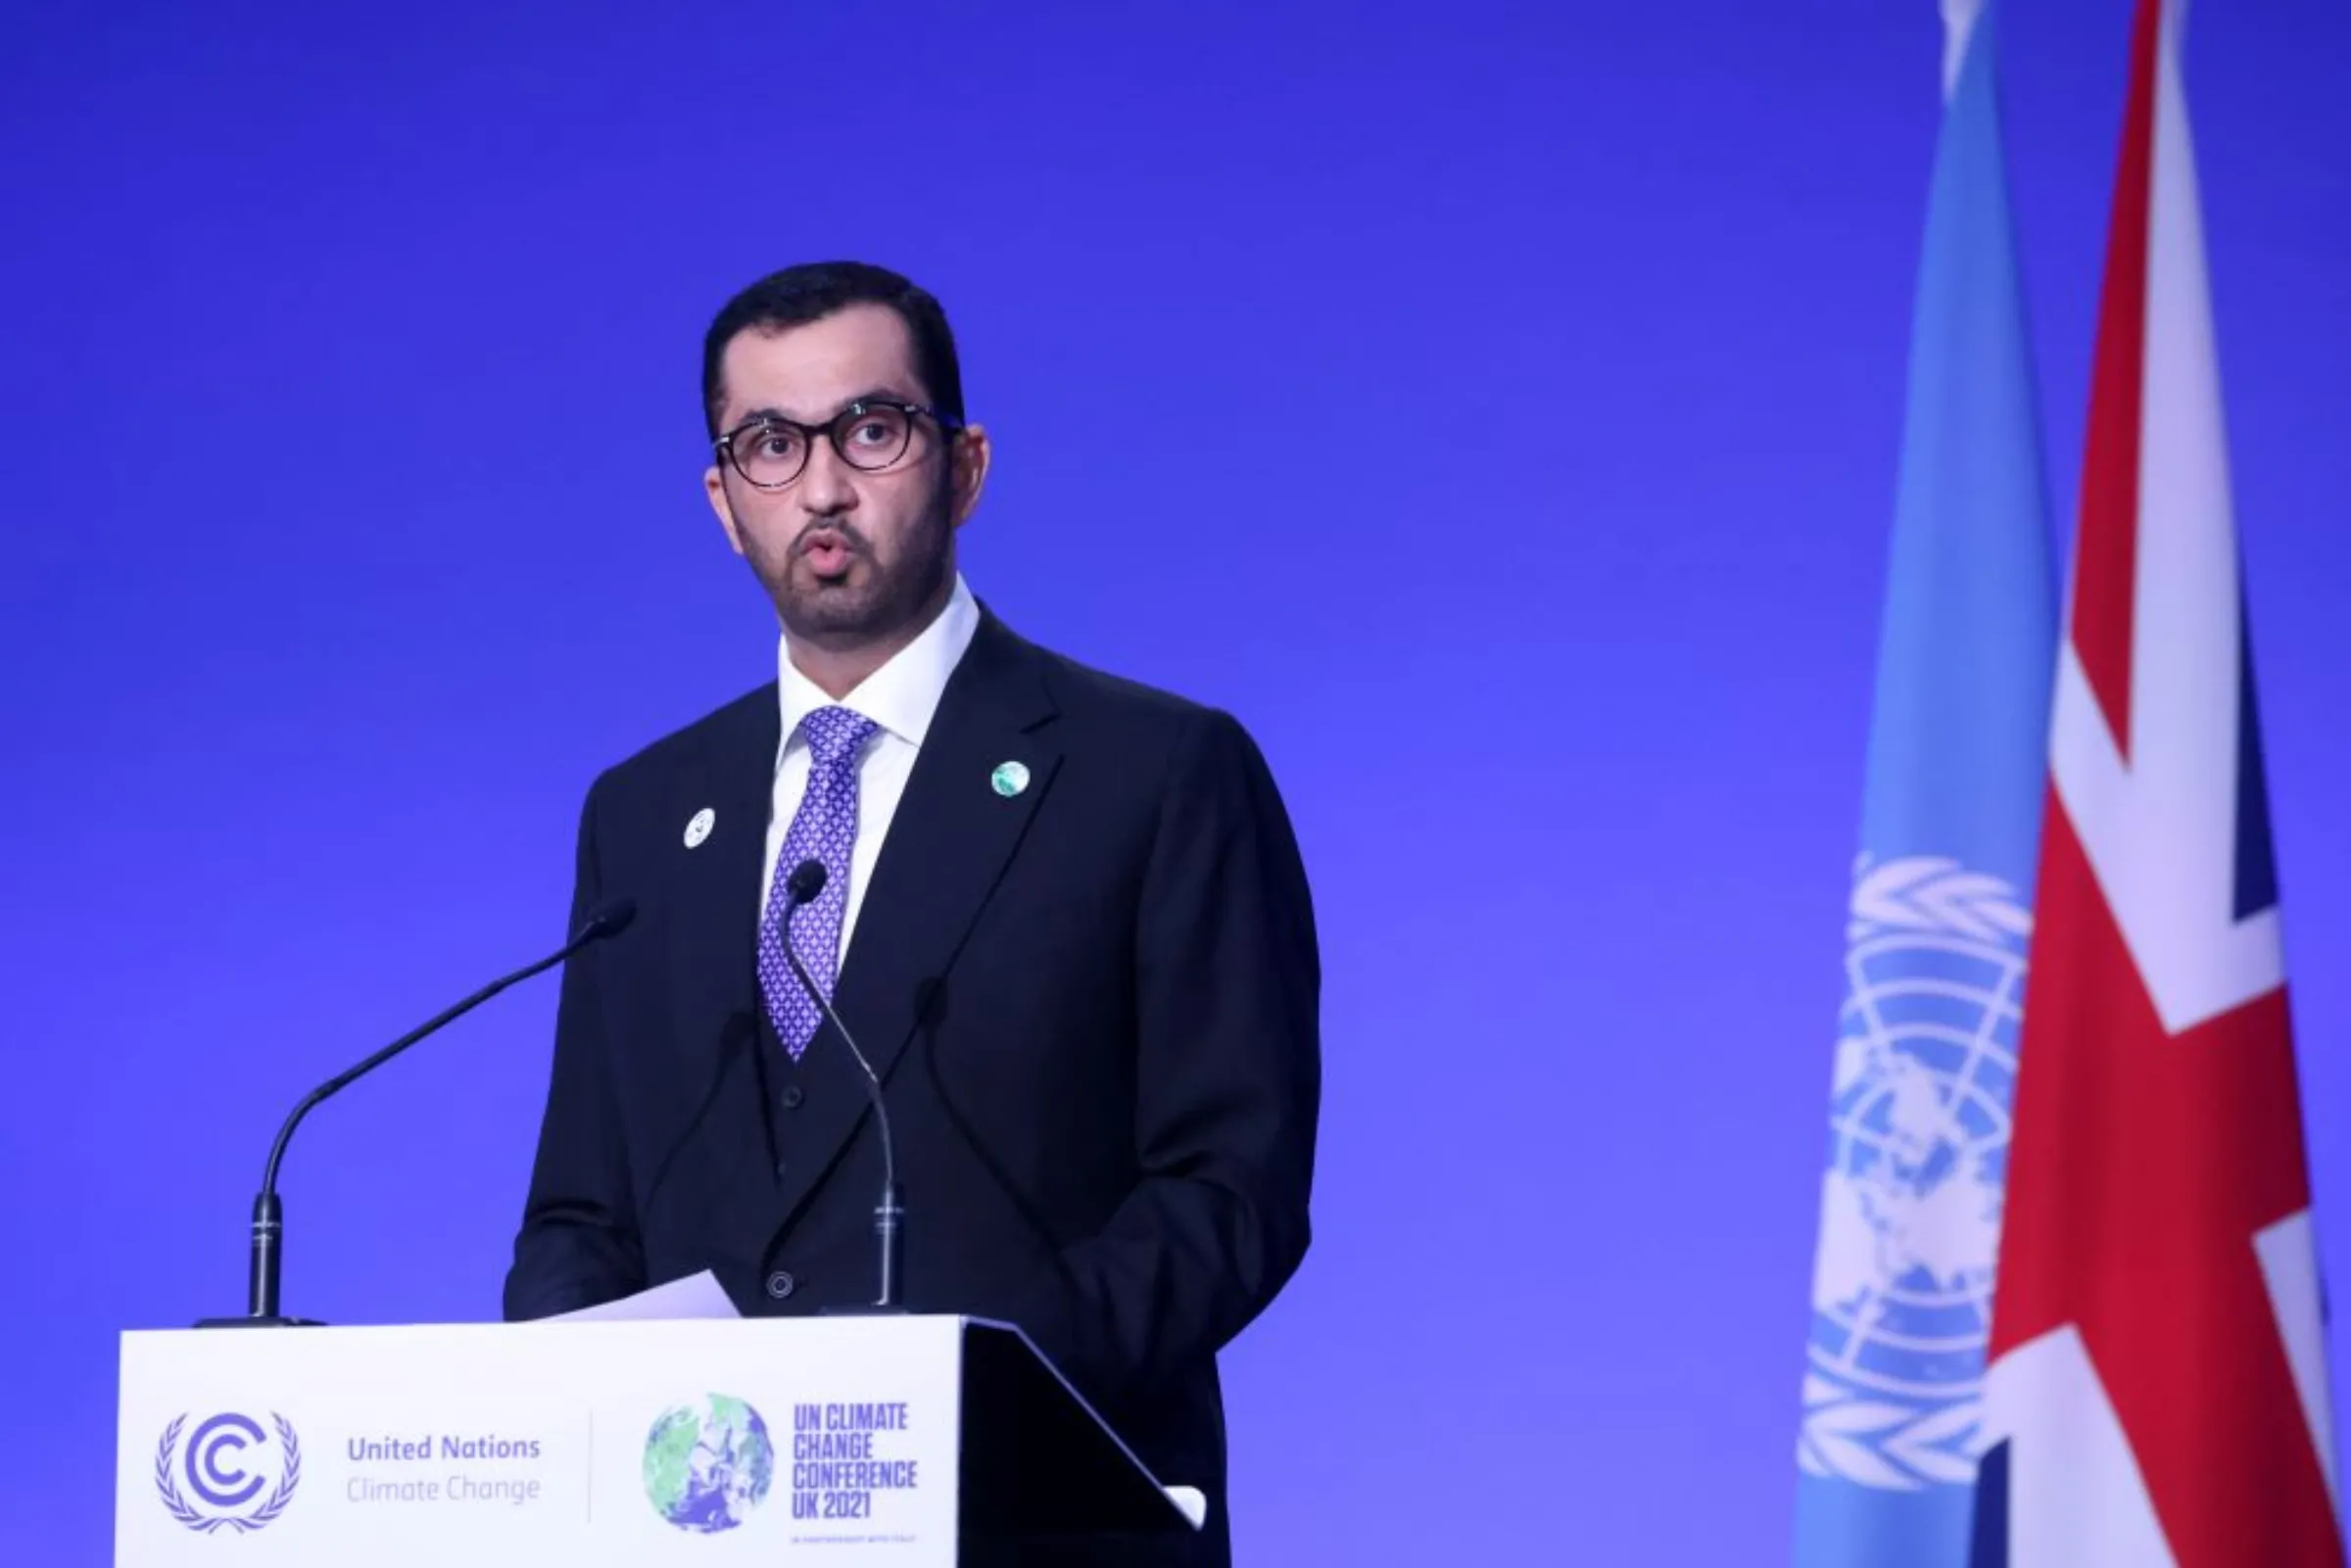 United Arab Emirates' Minister of Industry and Advanced Technology, and CEO of the Abu Dhabi National Oil Company, Sultan Ahmed Al Jaber speaks during the UN Climate Change Conference (COP26), in Glasgow, Scotland, Britain, November 10, 2021. REUTERS/Yves Herman